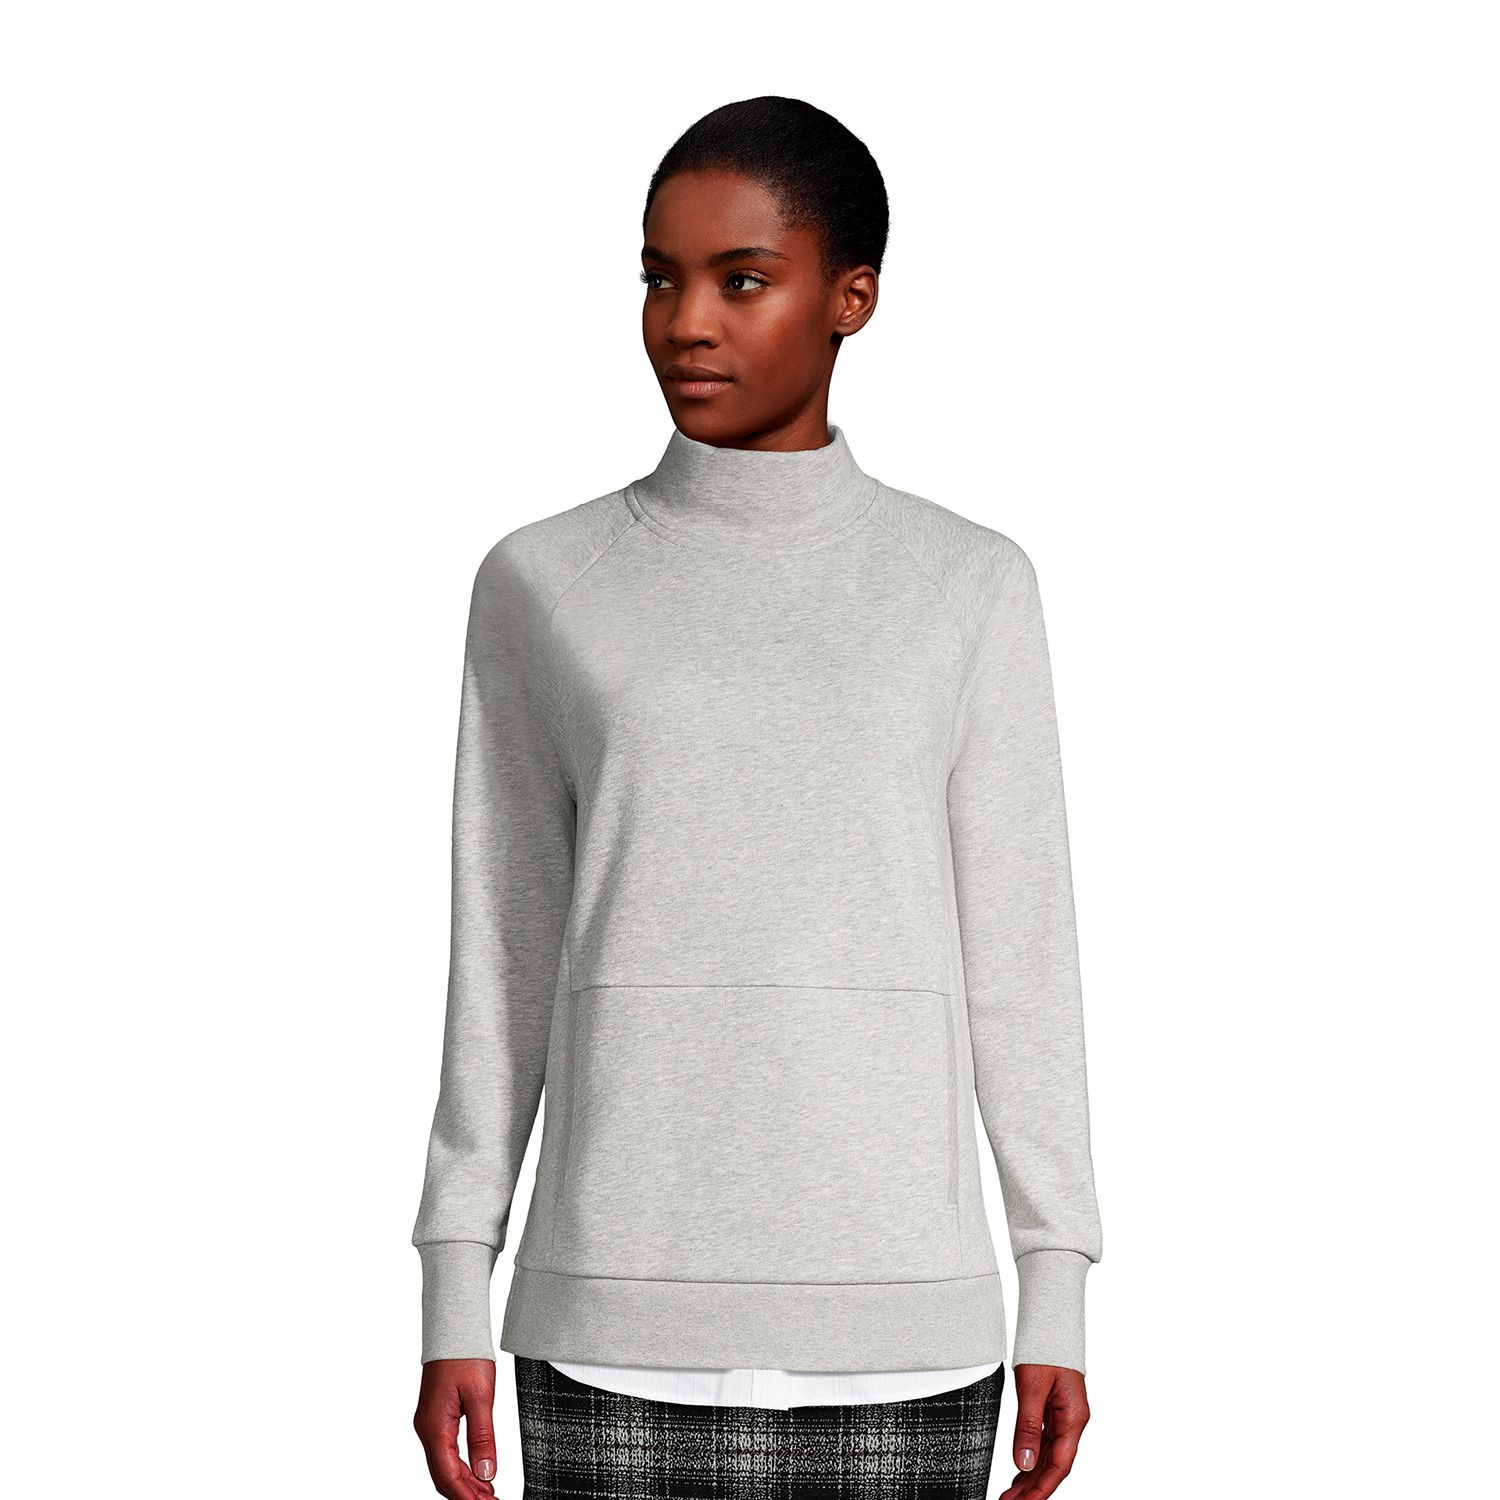 Image for Lands' End Women's Serious Sweats Funnel Neck Sweatshirt at Kohl's.